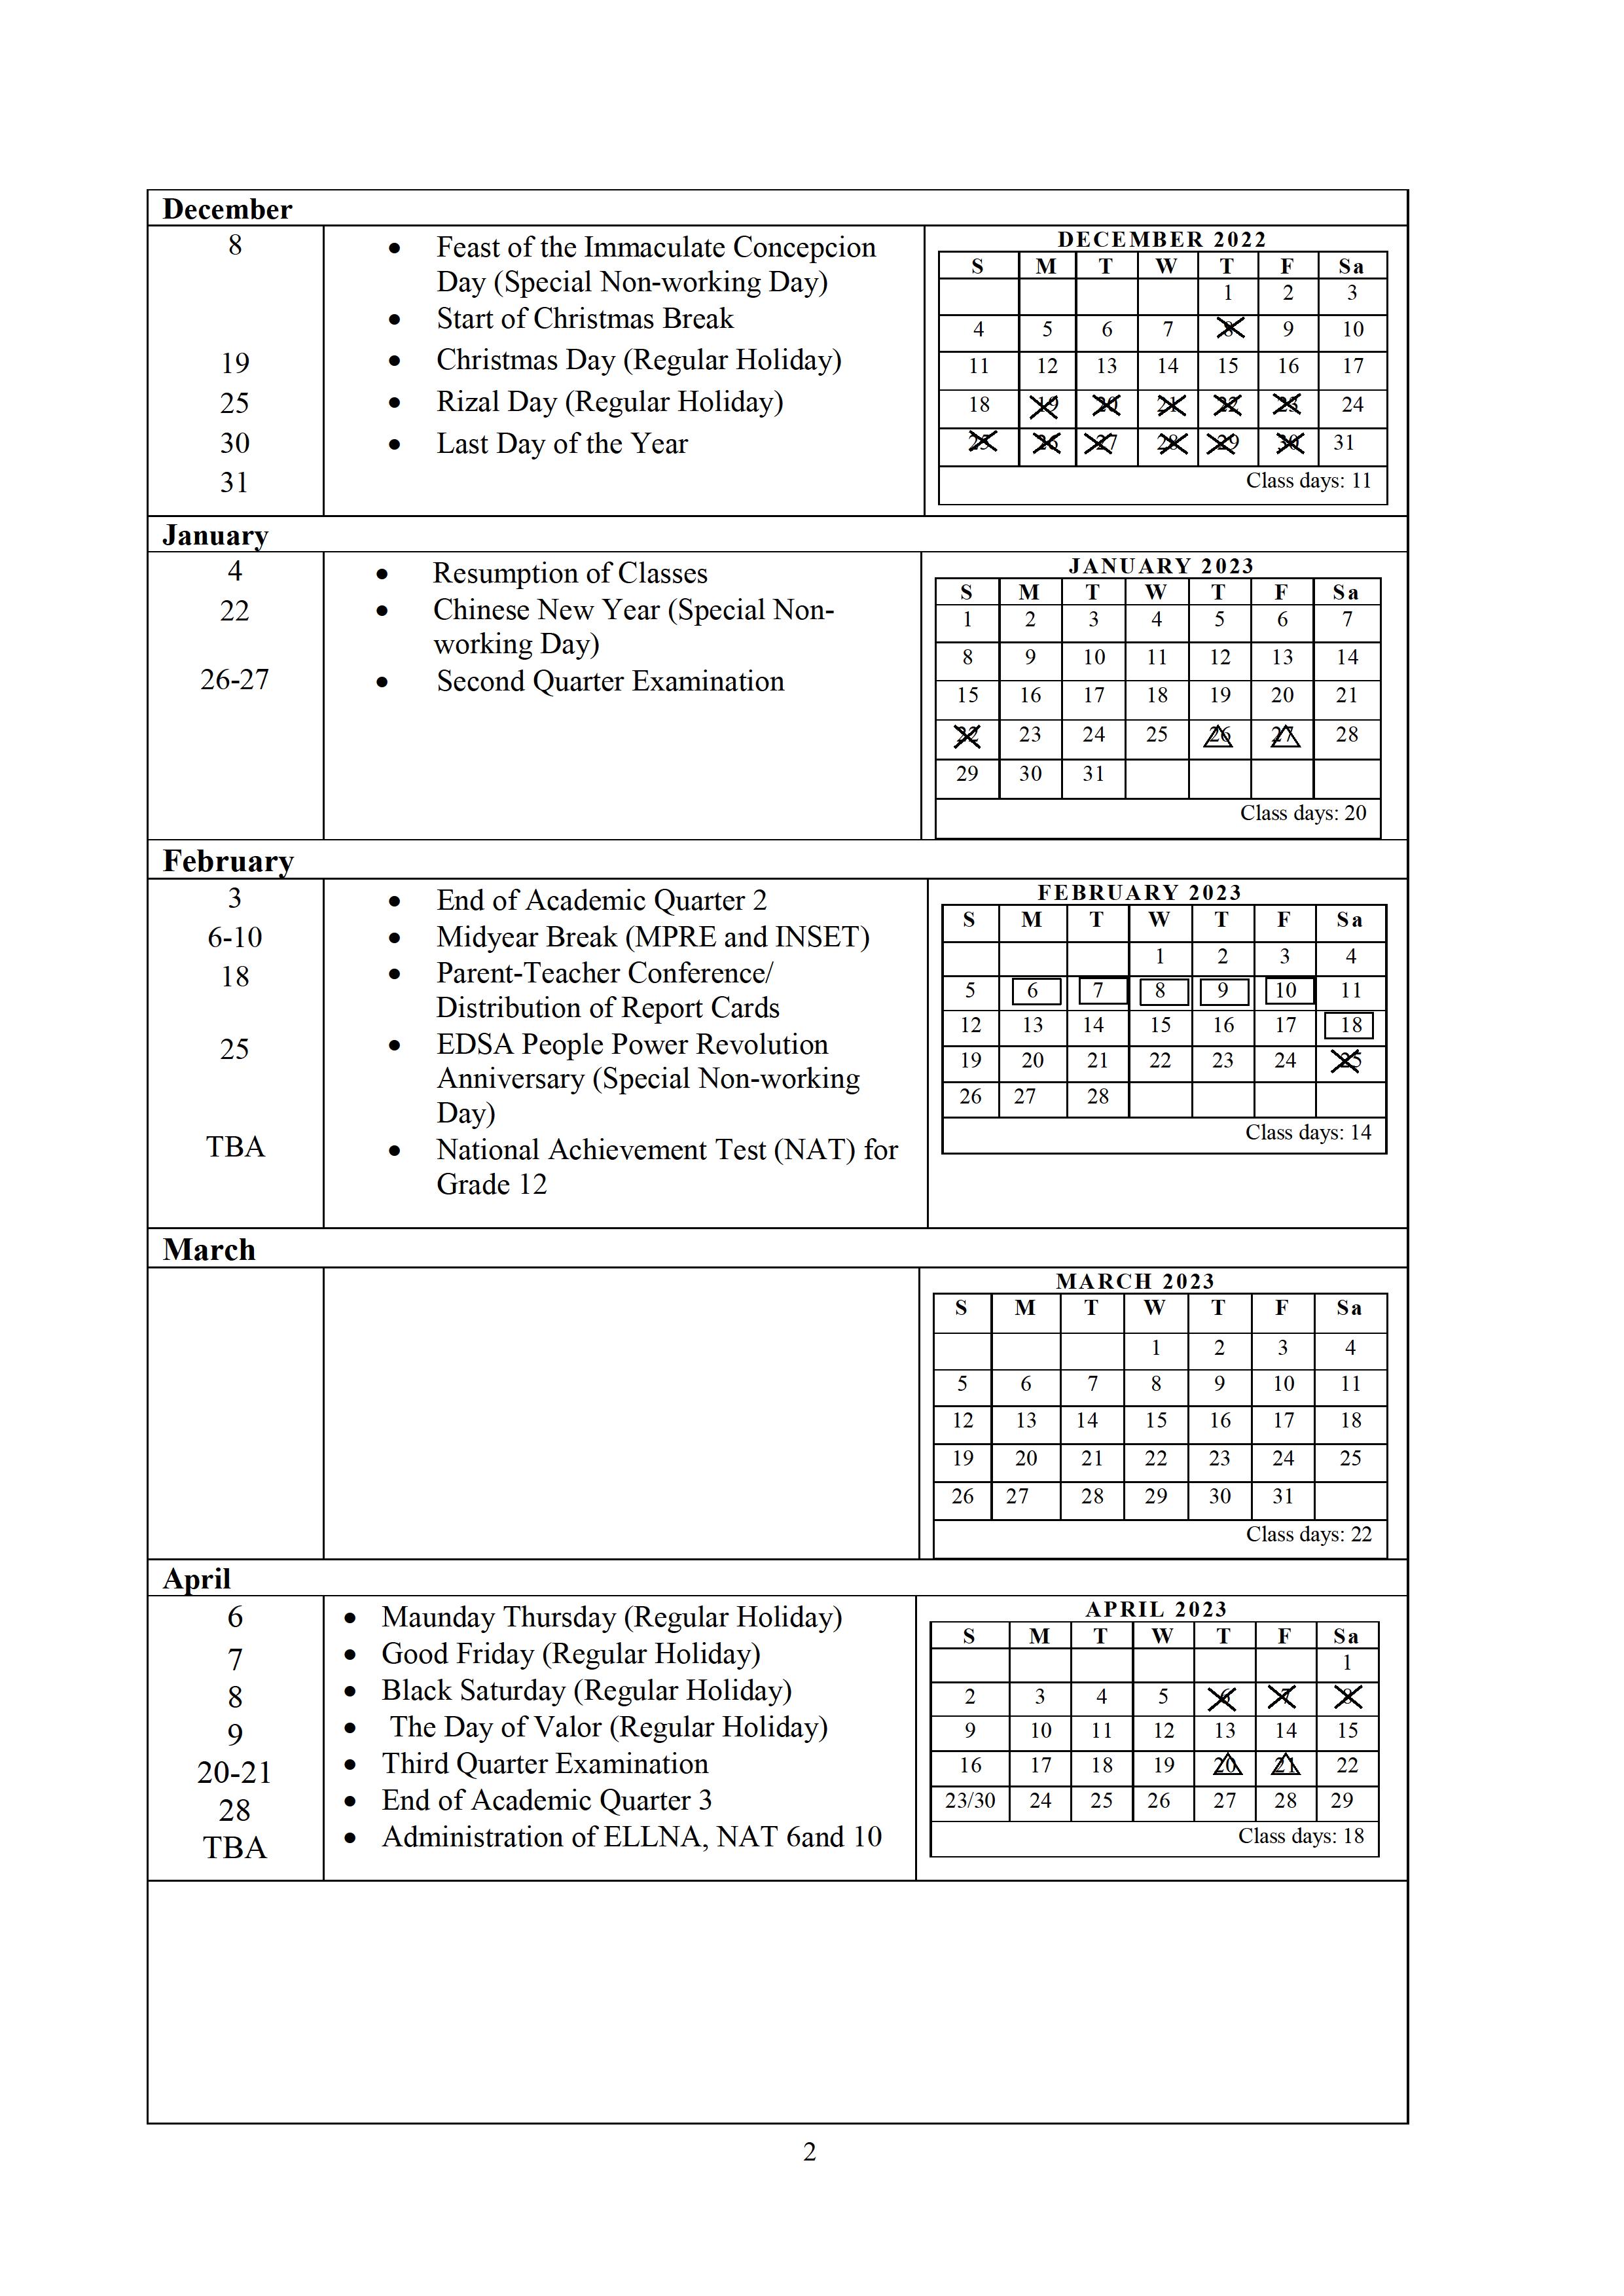 DepEd Career Guidance Activities, PTA Conferences and Cards Distribution Schedule